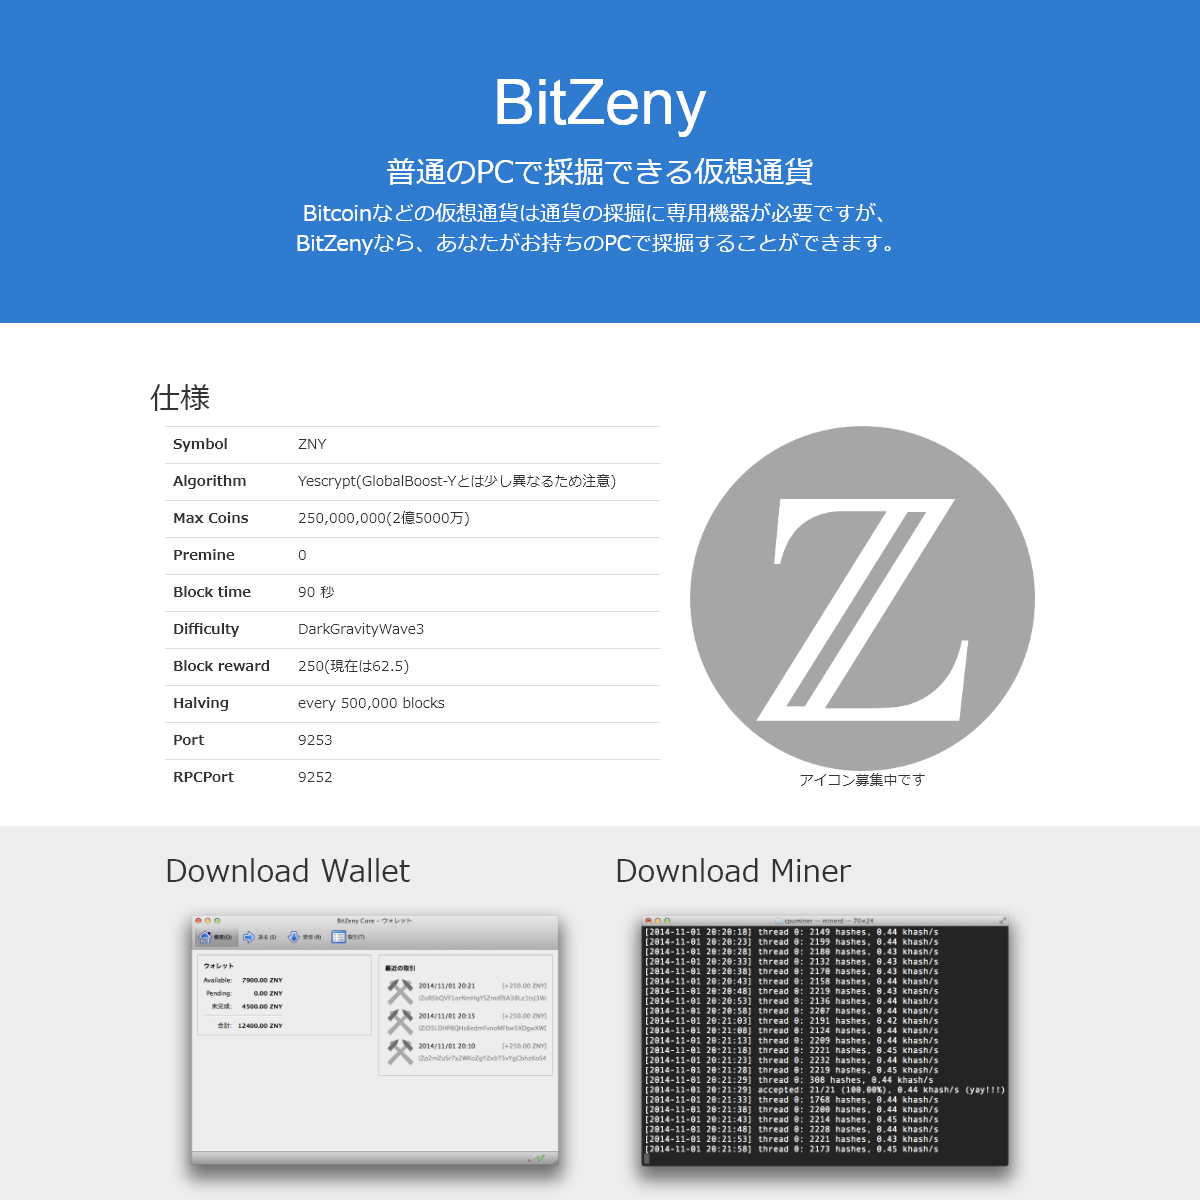 A complete backup of bitzeny.org